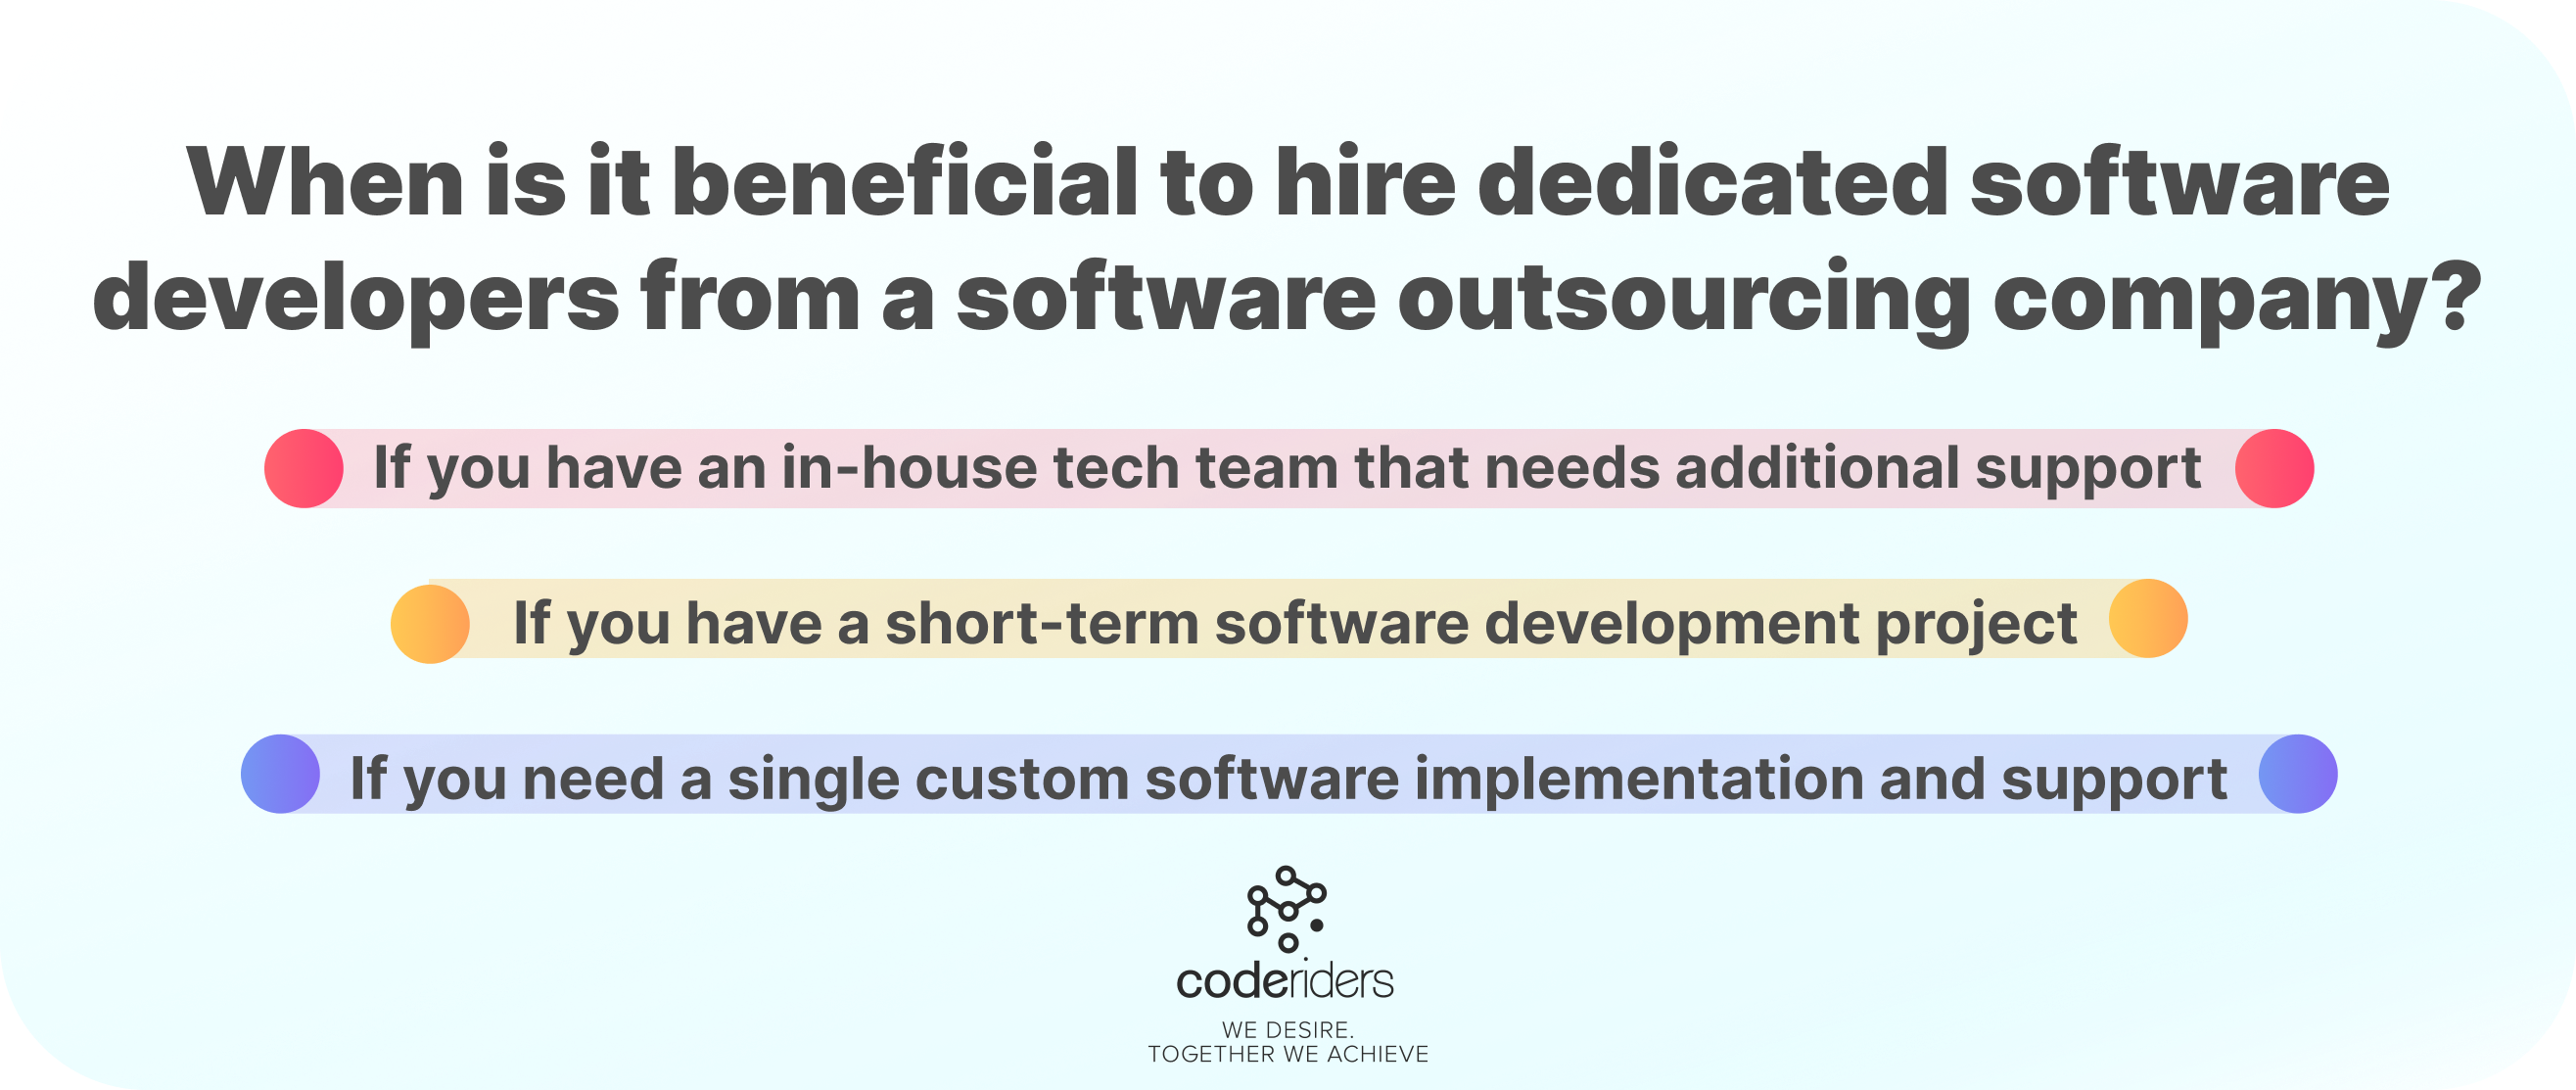 When is it beneficial to hire dedicated software developers from a software outsourcing company